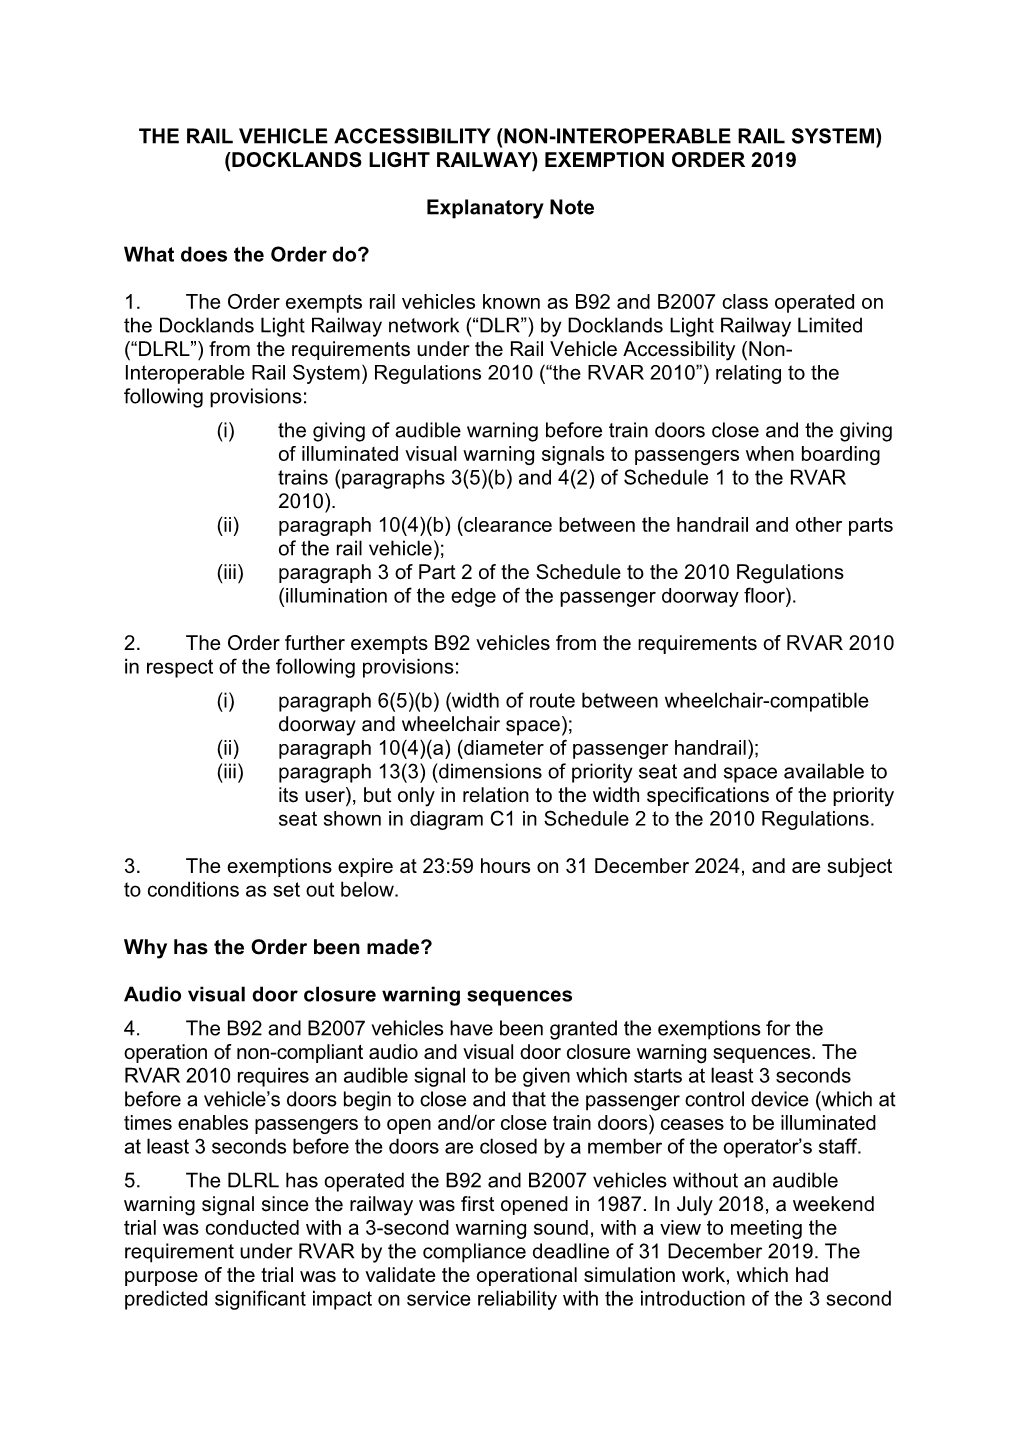 The Rail Vehicle Accessibility (Non-Interoperable Rail System) (Docklands Light Railway) Exemption Order 2019